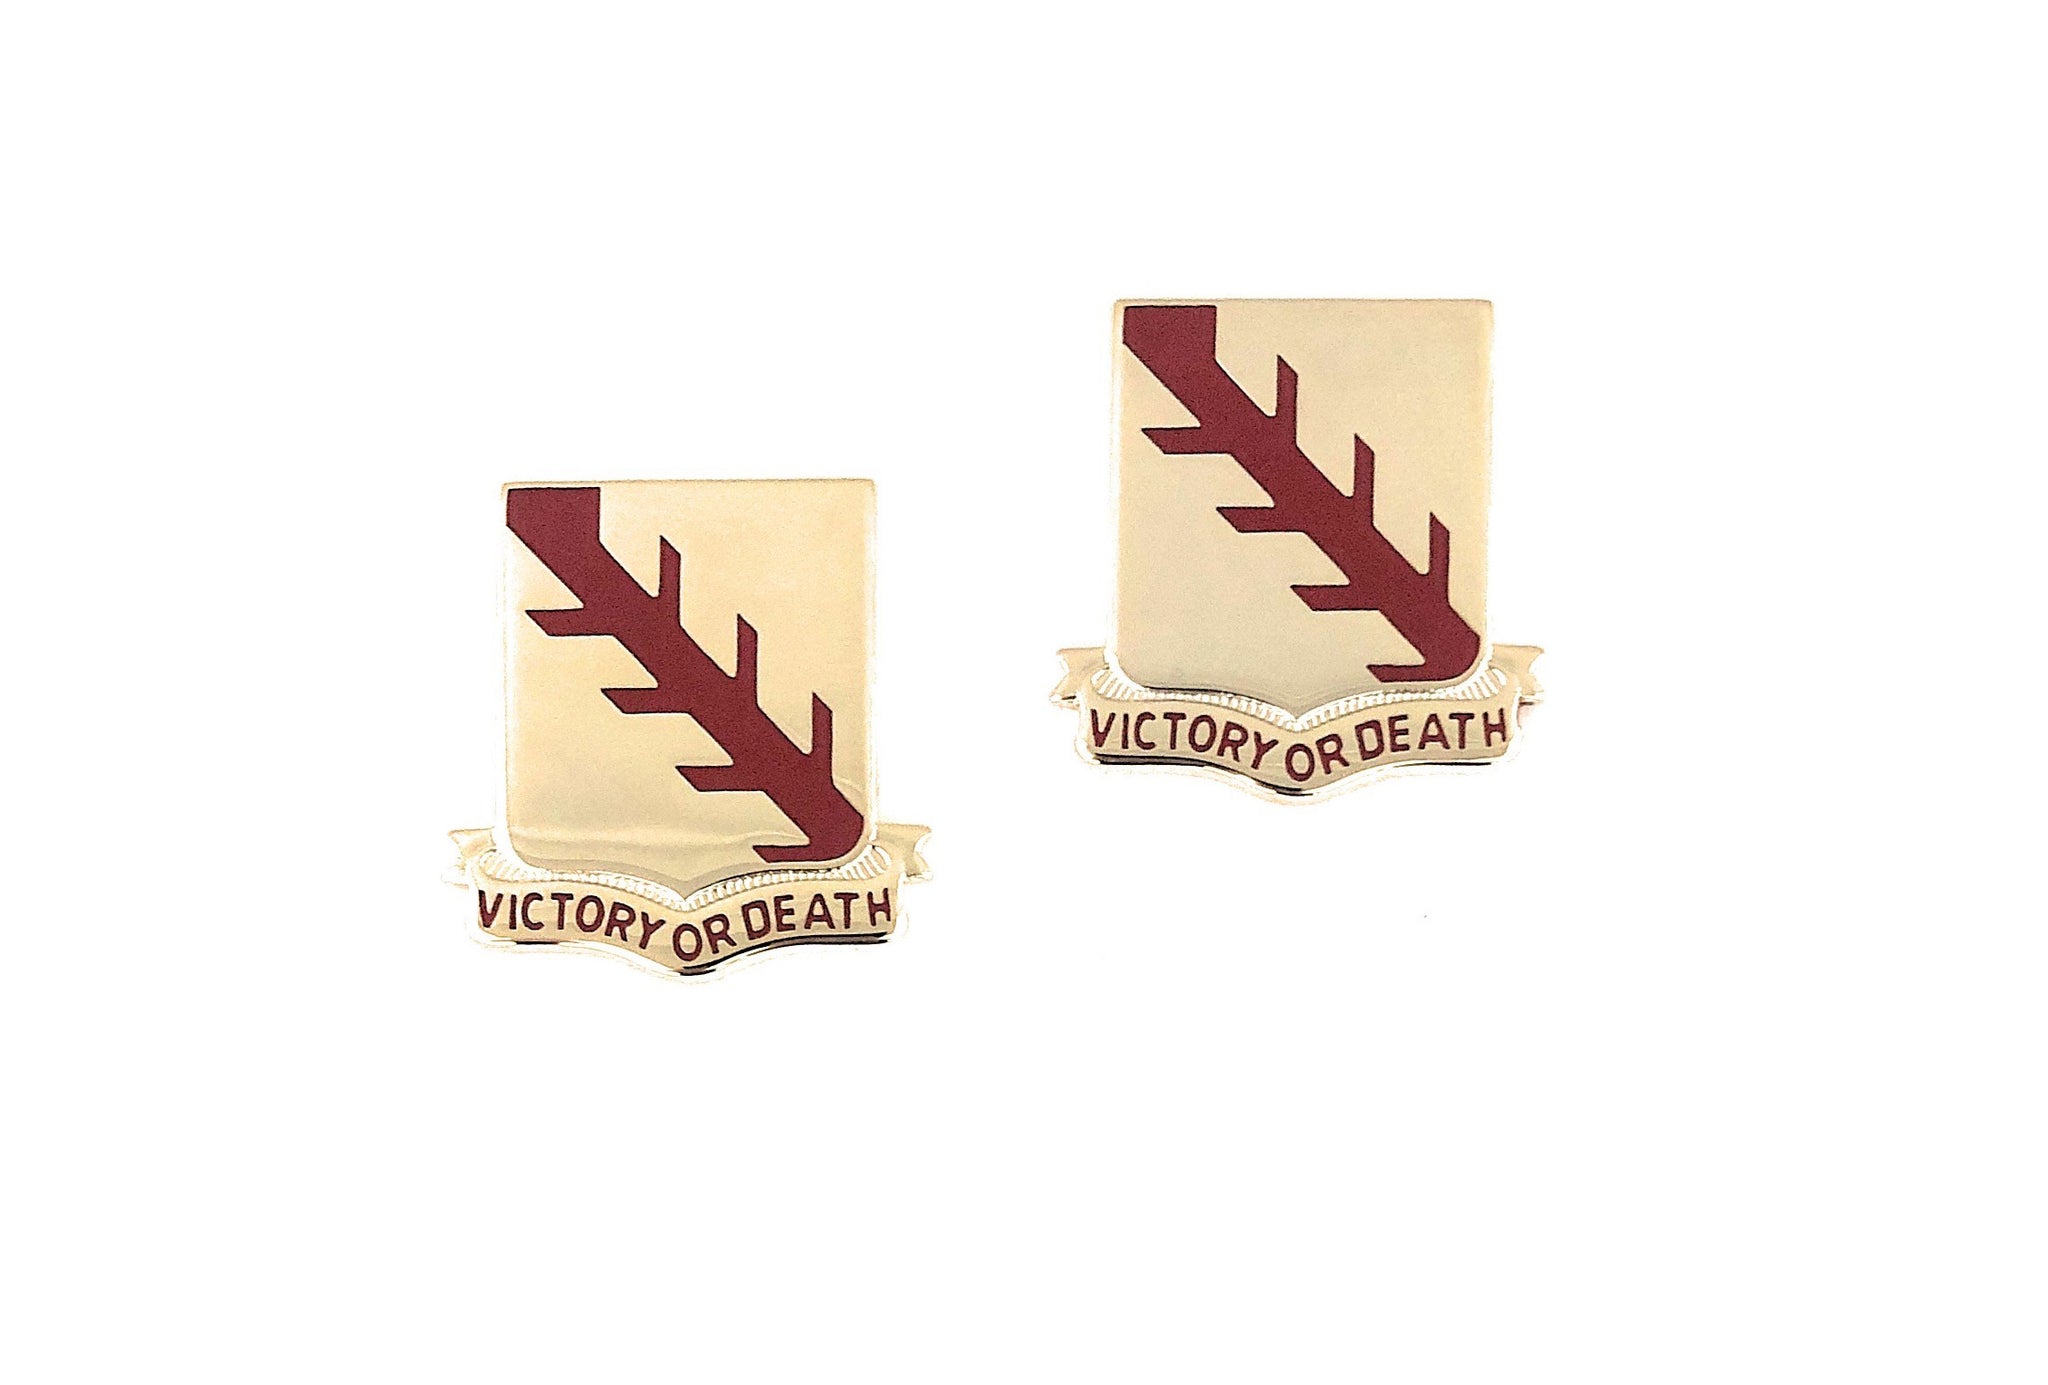 32nd Armored Cavalry Regiment Crest " Victory Or Death" (pair)